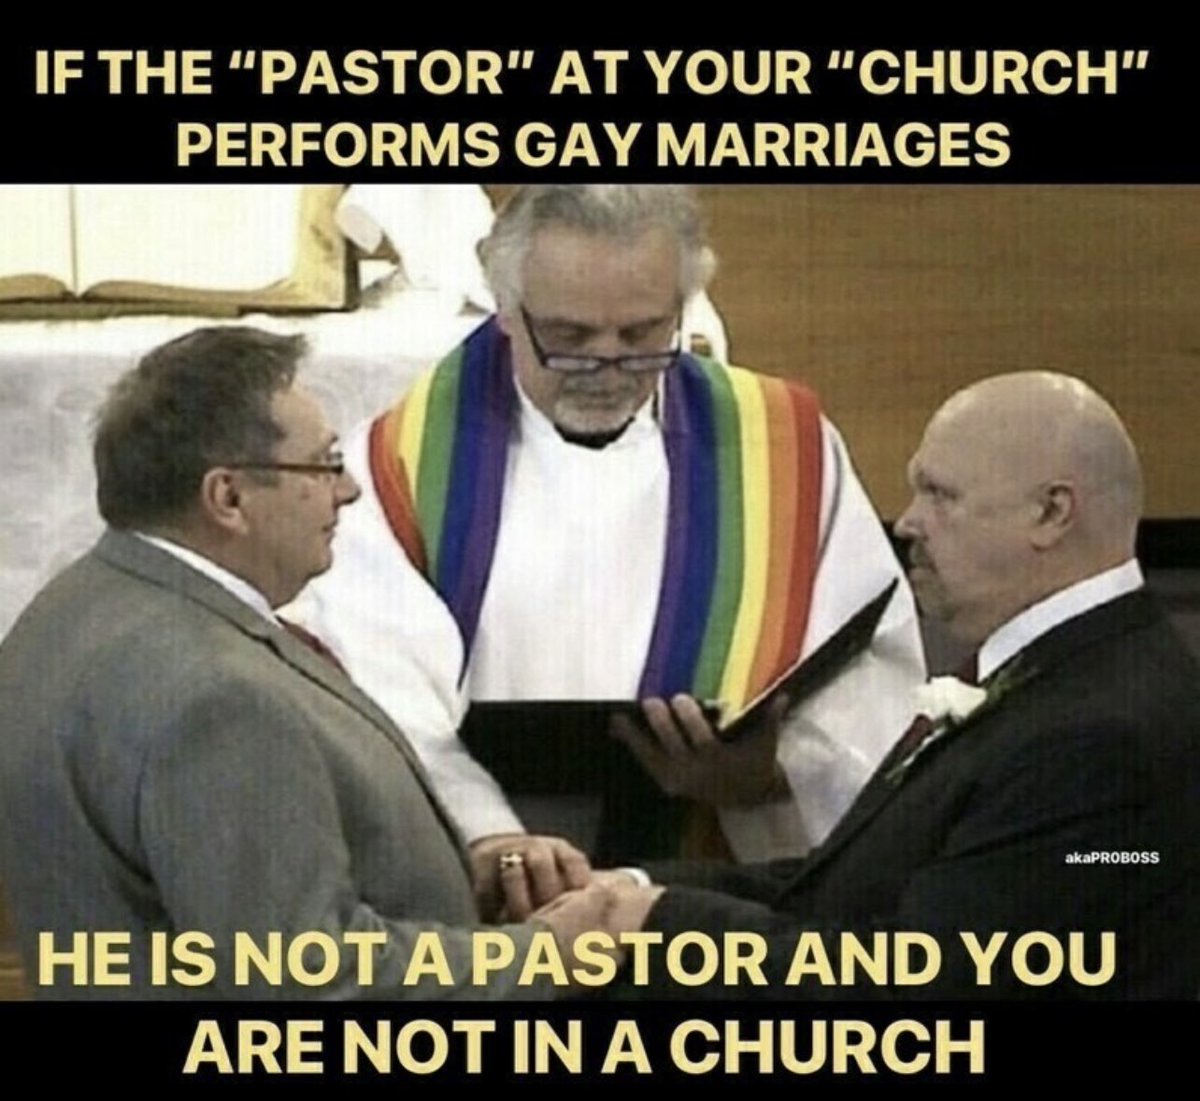 I agree 100%👇 If this is what your “pastor” is preaching, best find a new church. Who feels the same? 🙋‍♂️